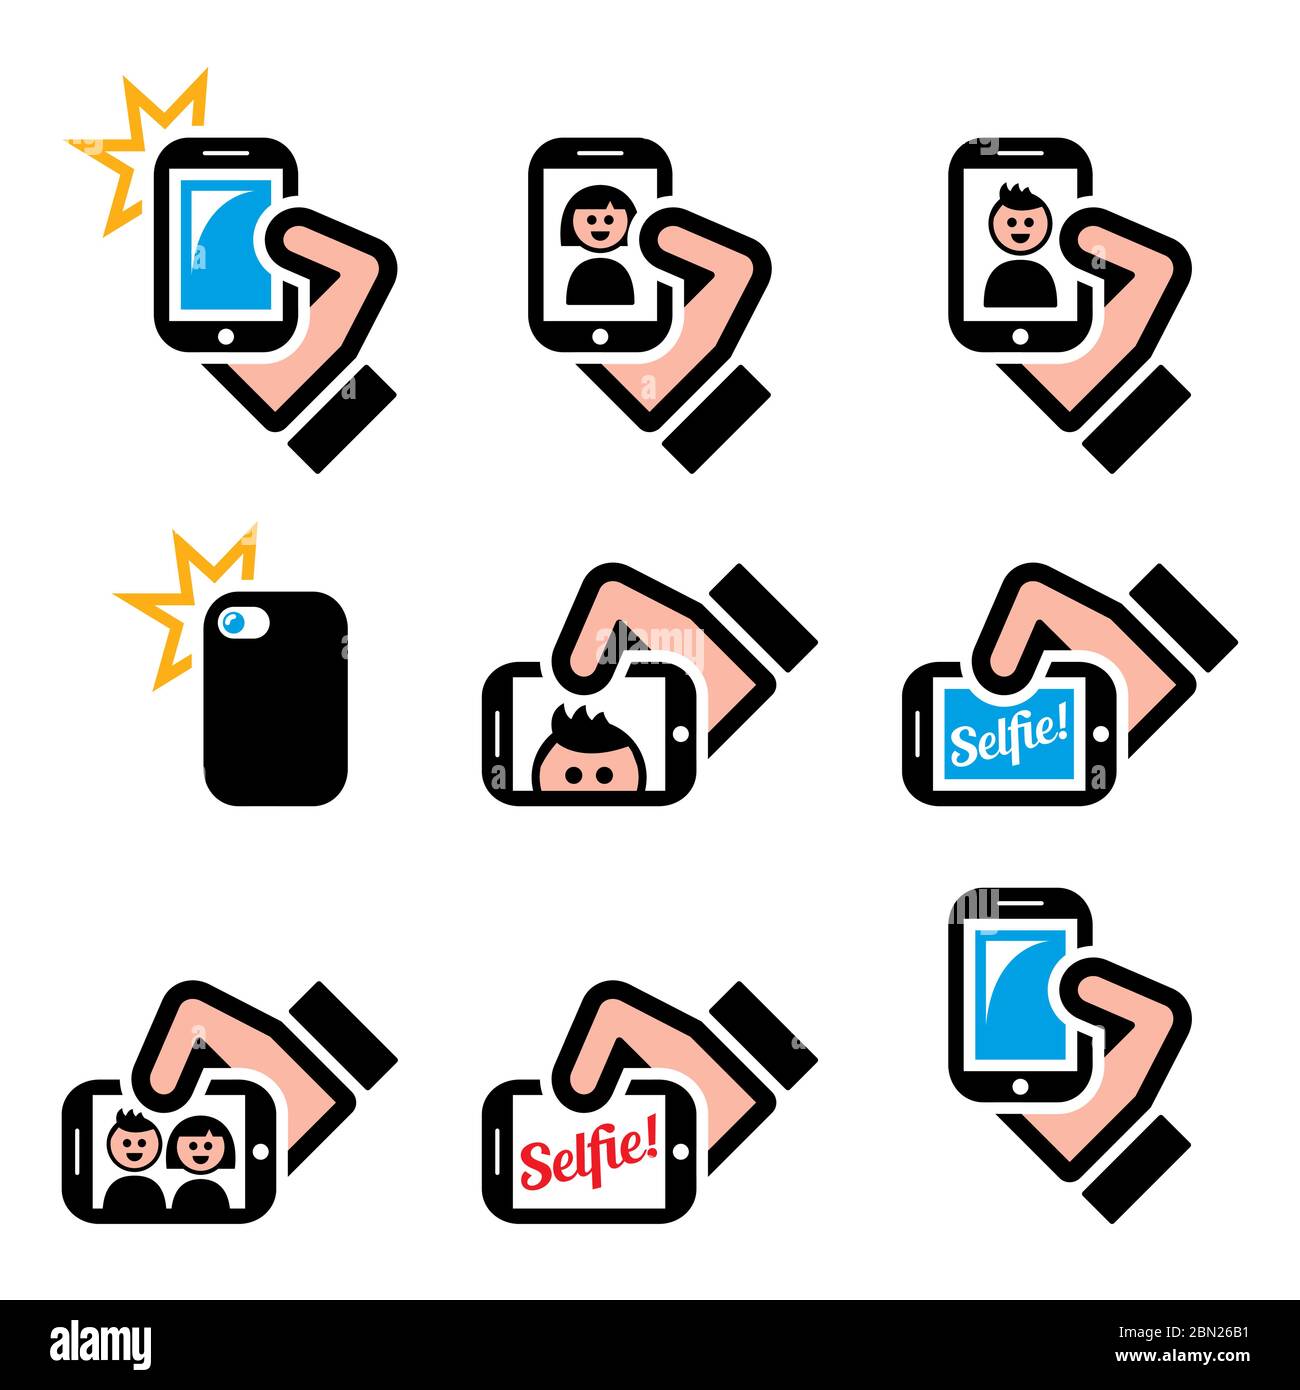 Selfie, taking photos with smartphones for social media vector icon set    Technology design set of people taking selfies with mobile or cell phones, Stock Vector